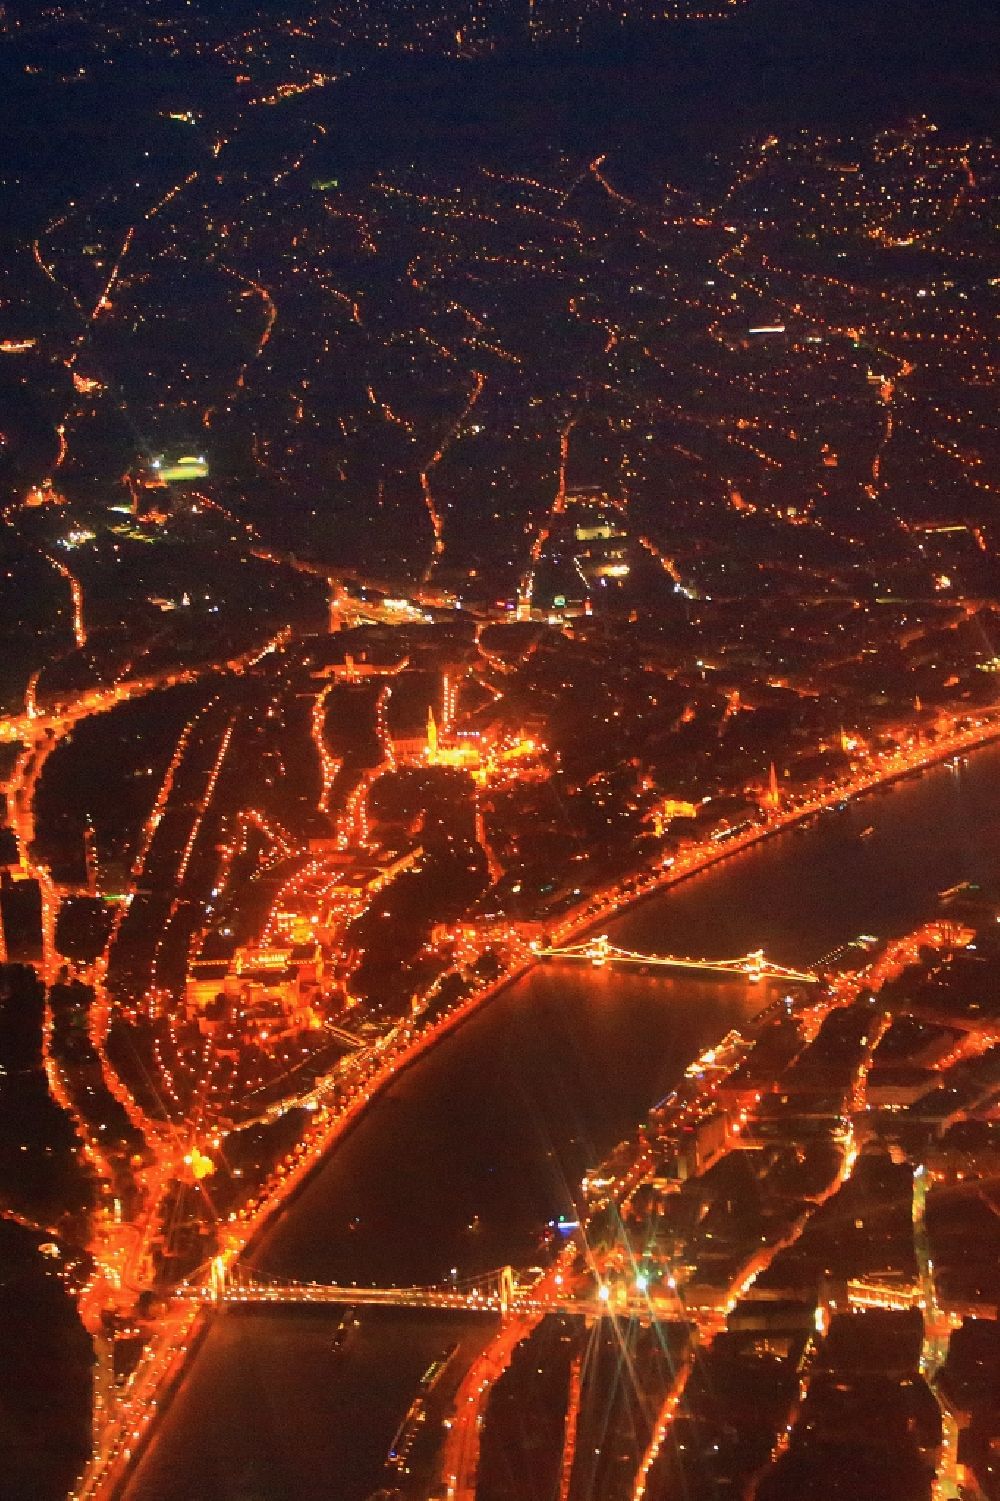 Aerial image at night Budapest - Night lighting city view on the river bank of the river Danube in Budapest in Hungary